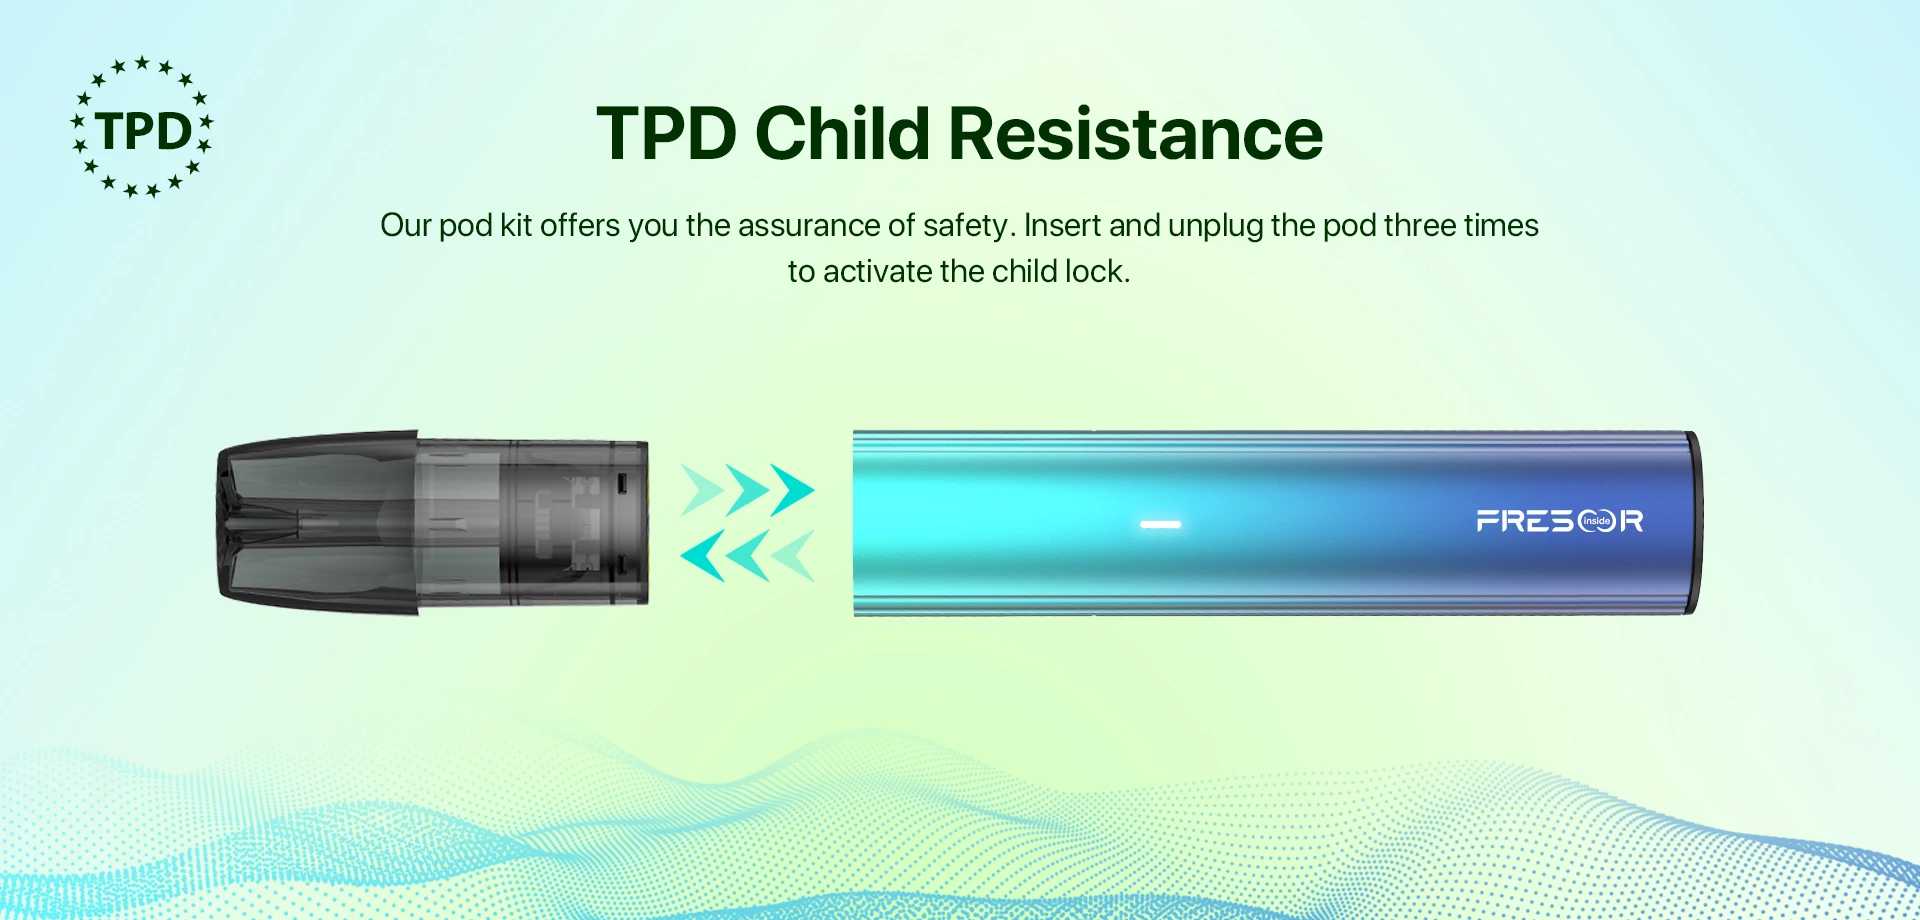 TPD Child Resistance Our pod kit offers you the assurance of safety. insert and unplug the pod three times to activate the child lock.